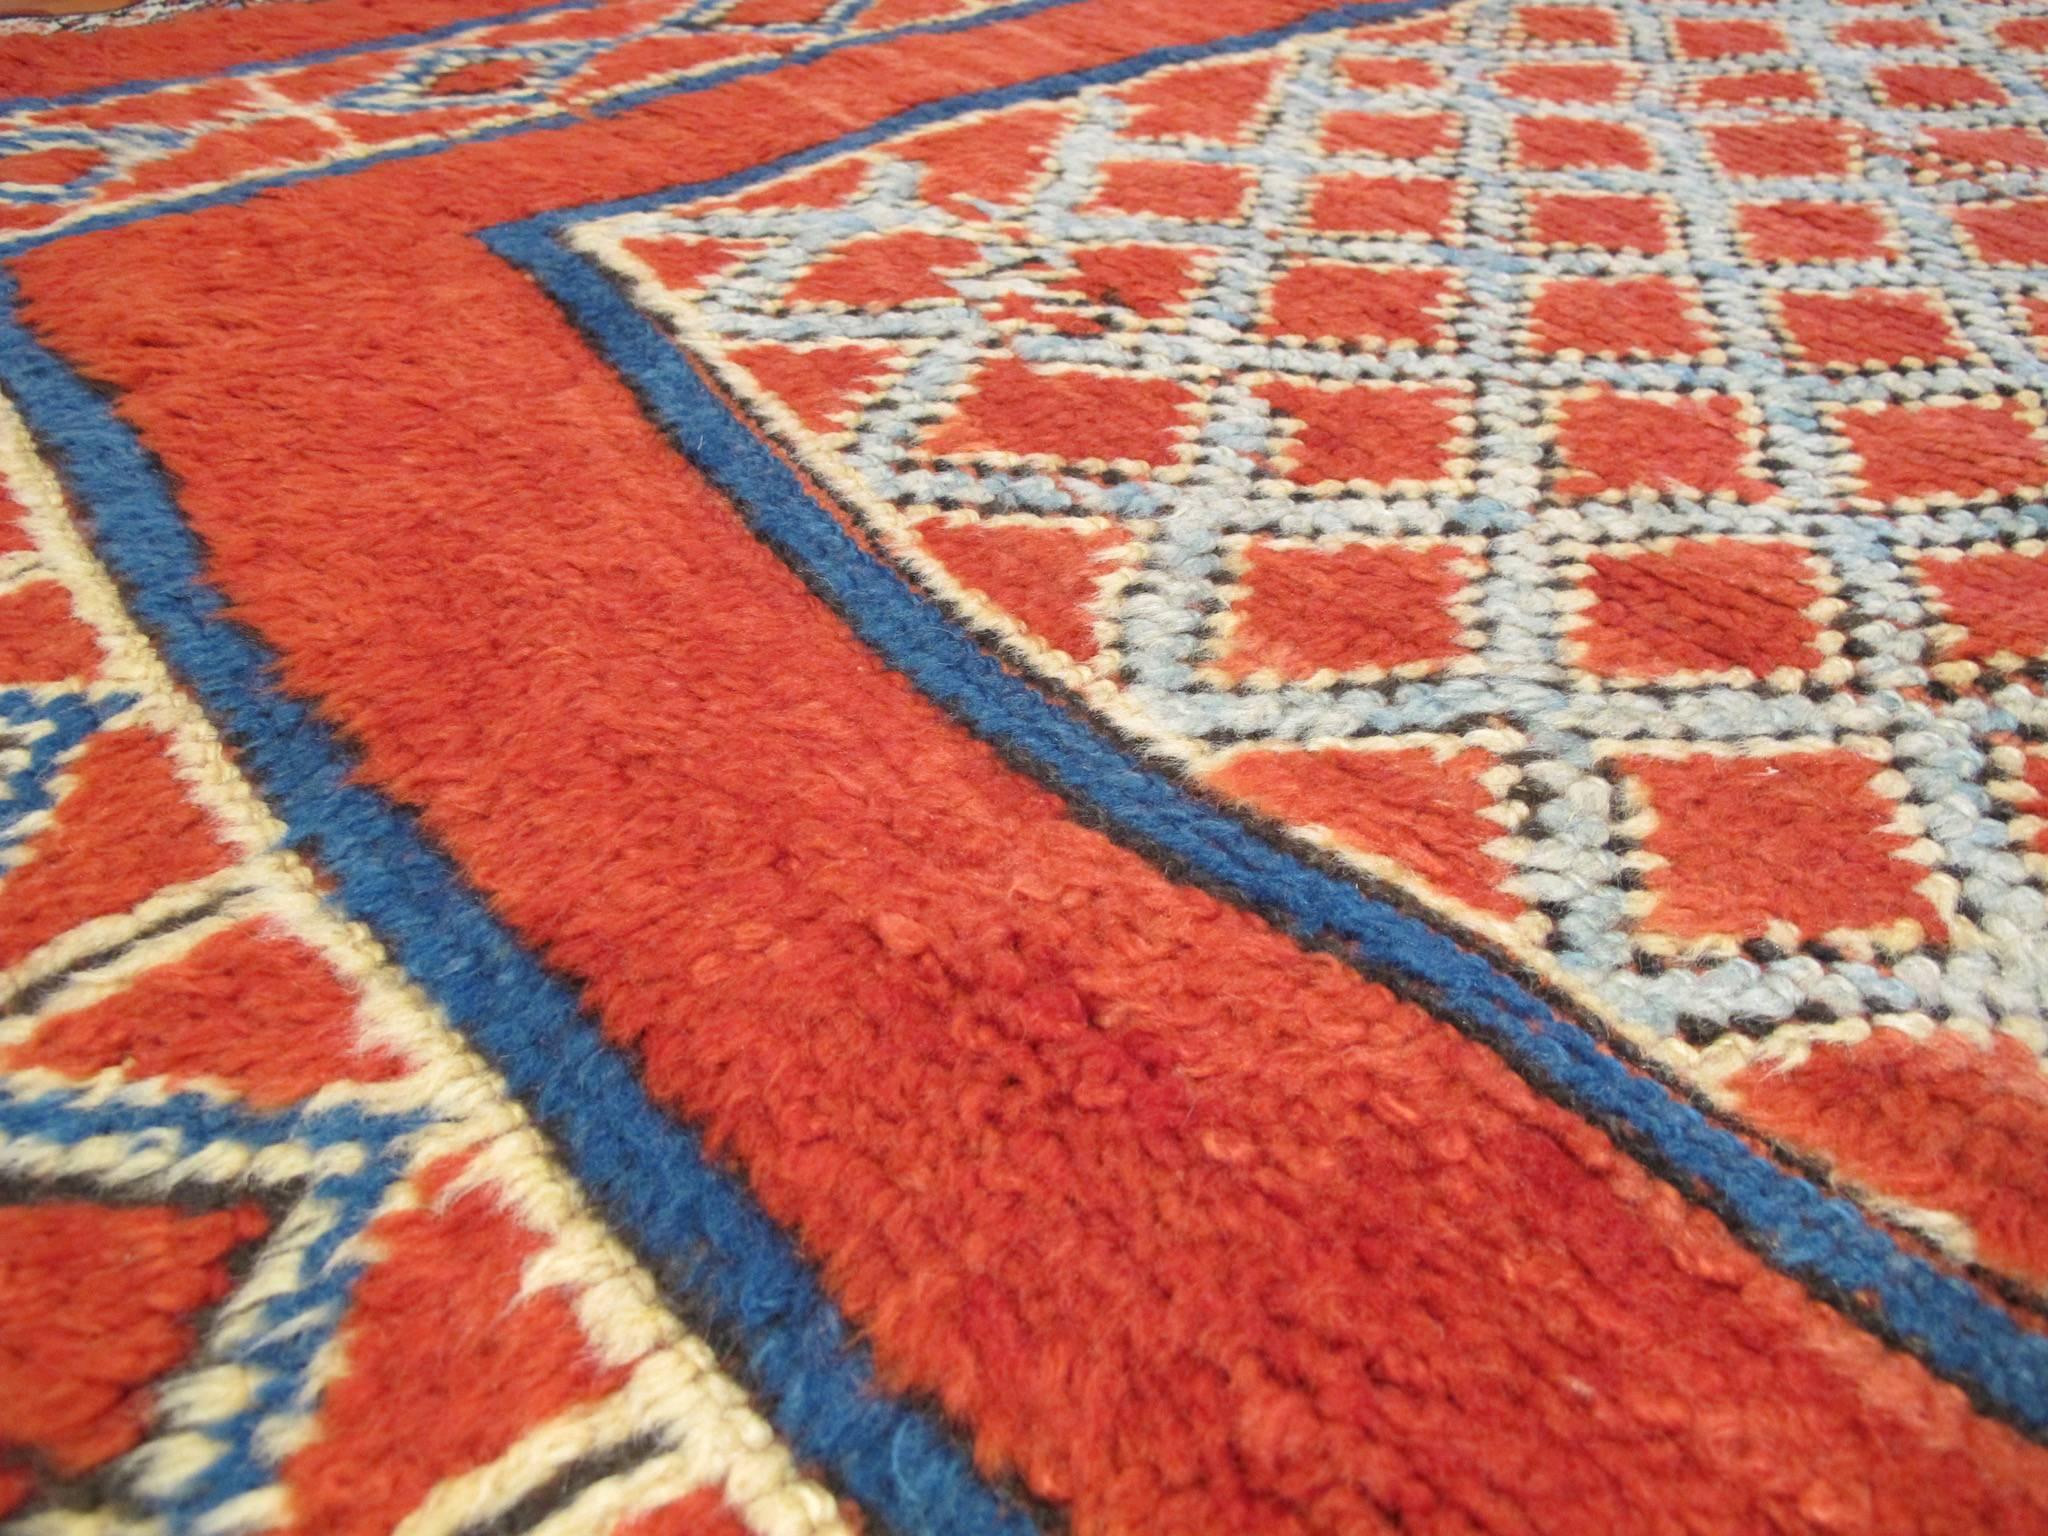 This fantastic Moroccan corridor carpet blends an almost ineffable aesthetic bordering on a modernist sensibility with a feeling that is distinctly and positively North African. Bold and free boxes drawn with close-ups of geometric lattice design,